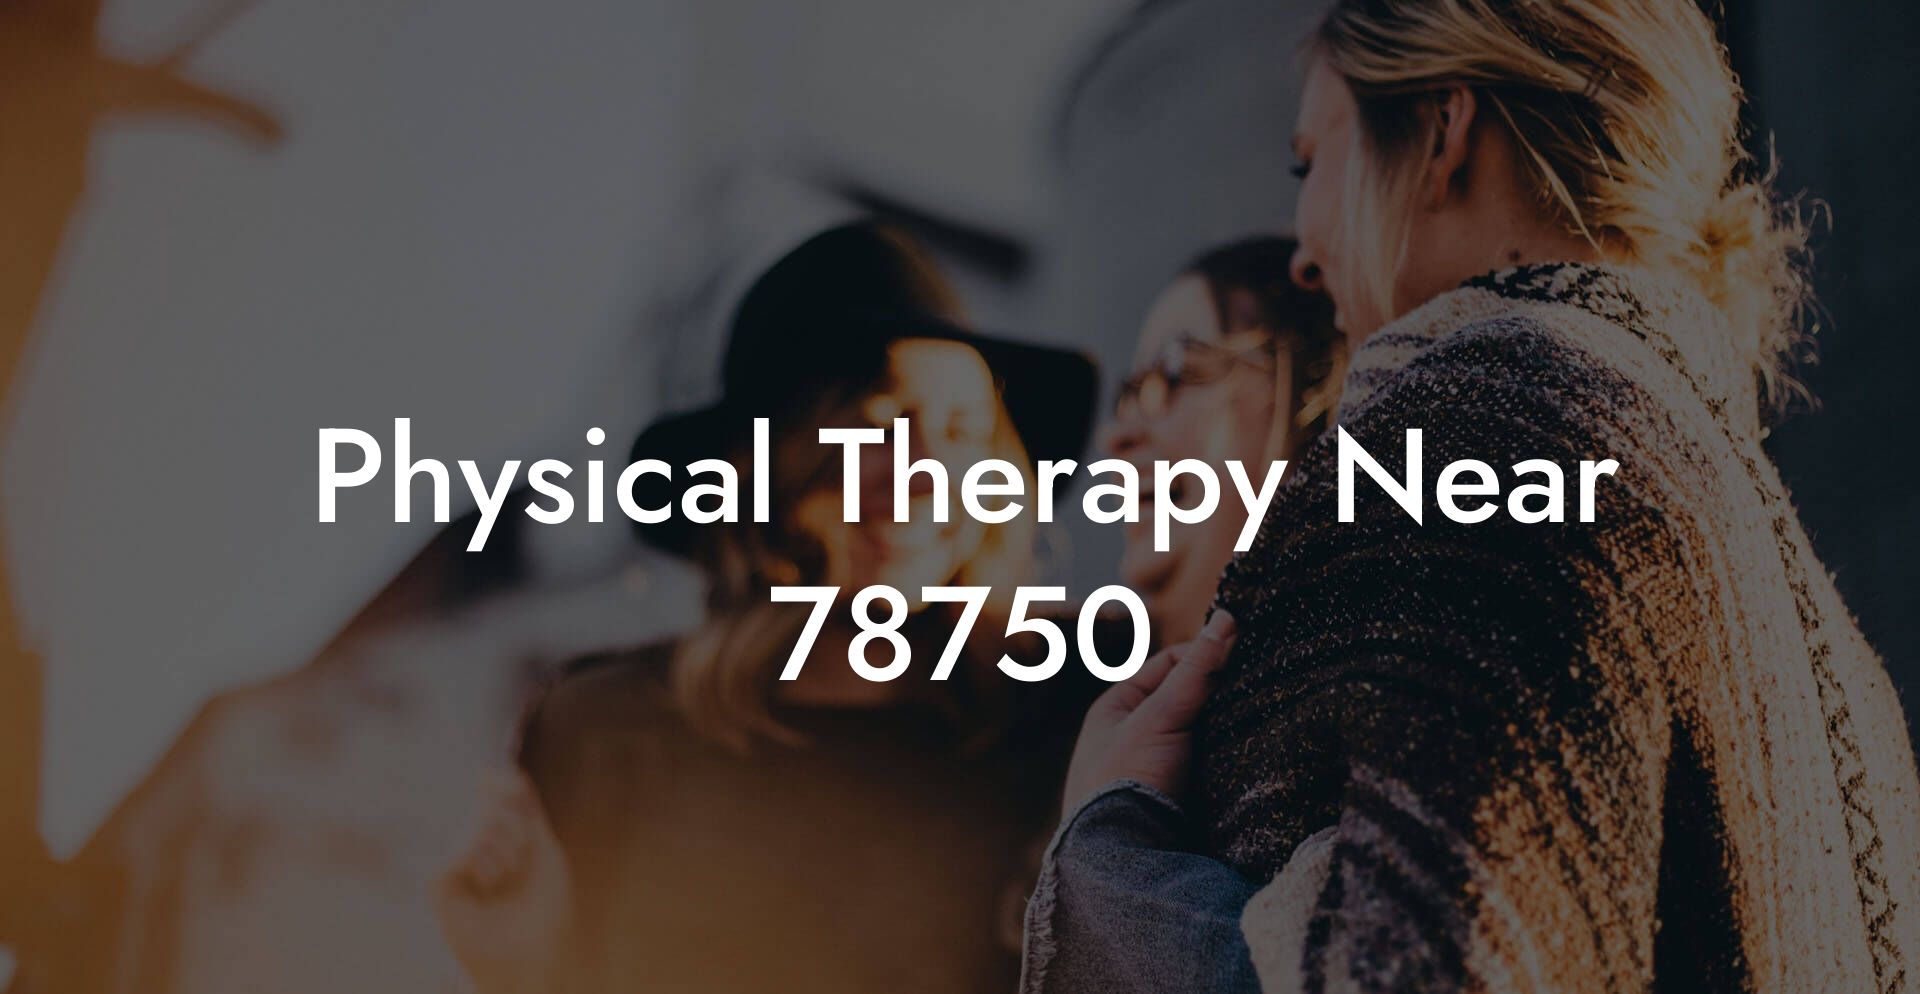 Physical Therapy Near 78750